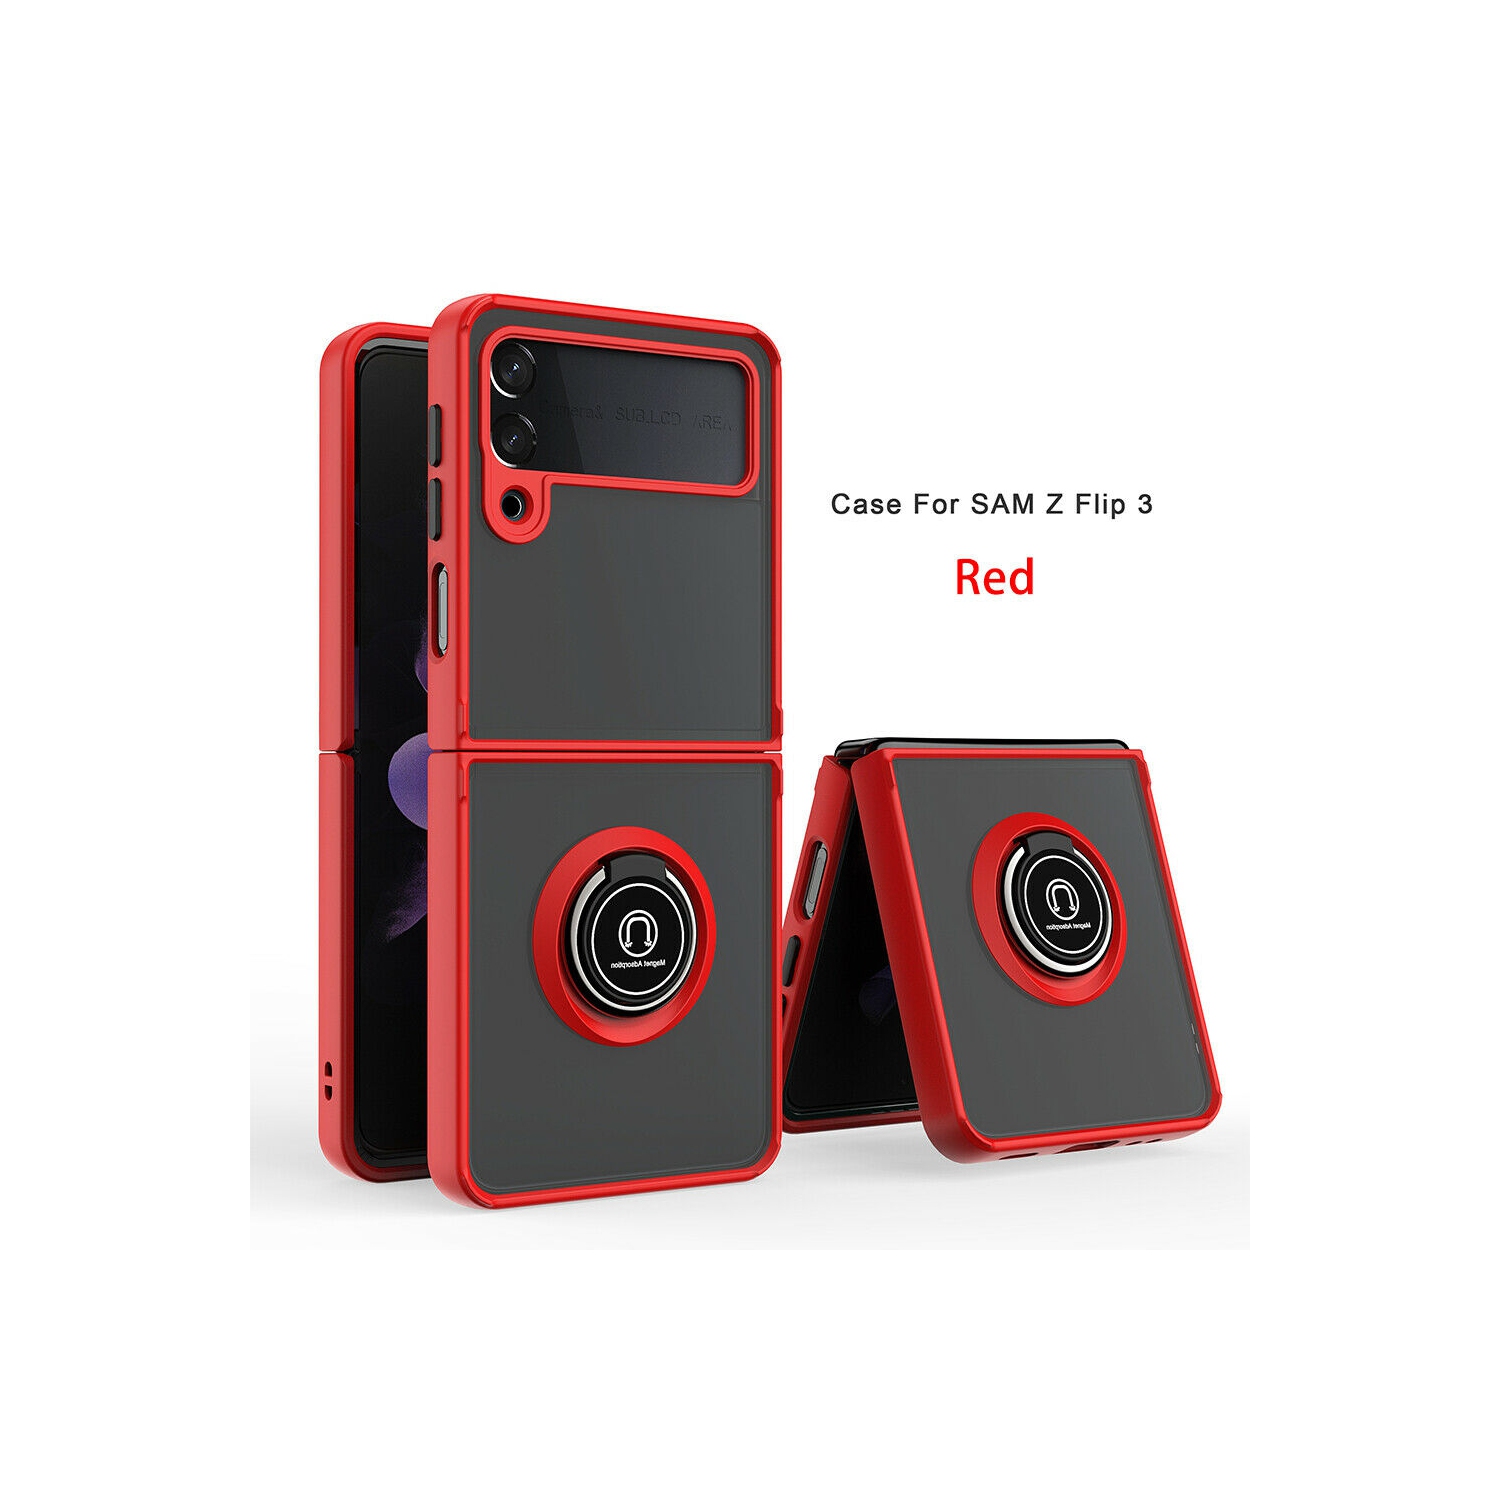 【CSmart】 Anti-Drop Rubberized Hybrid Magnetic Armor Case with Ring Holder for Samsung Galaxy Z Flip 3 5G, Red